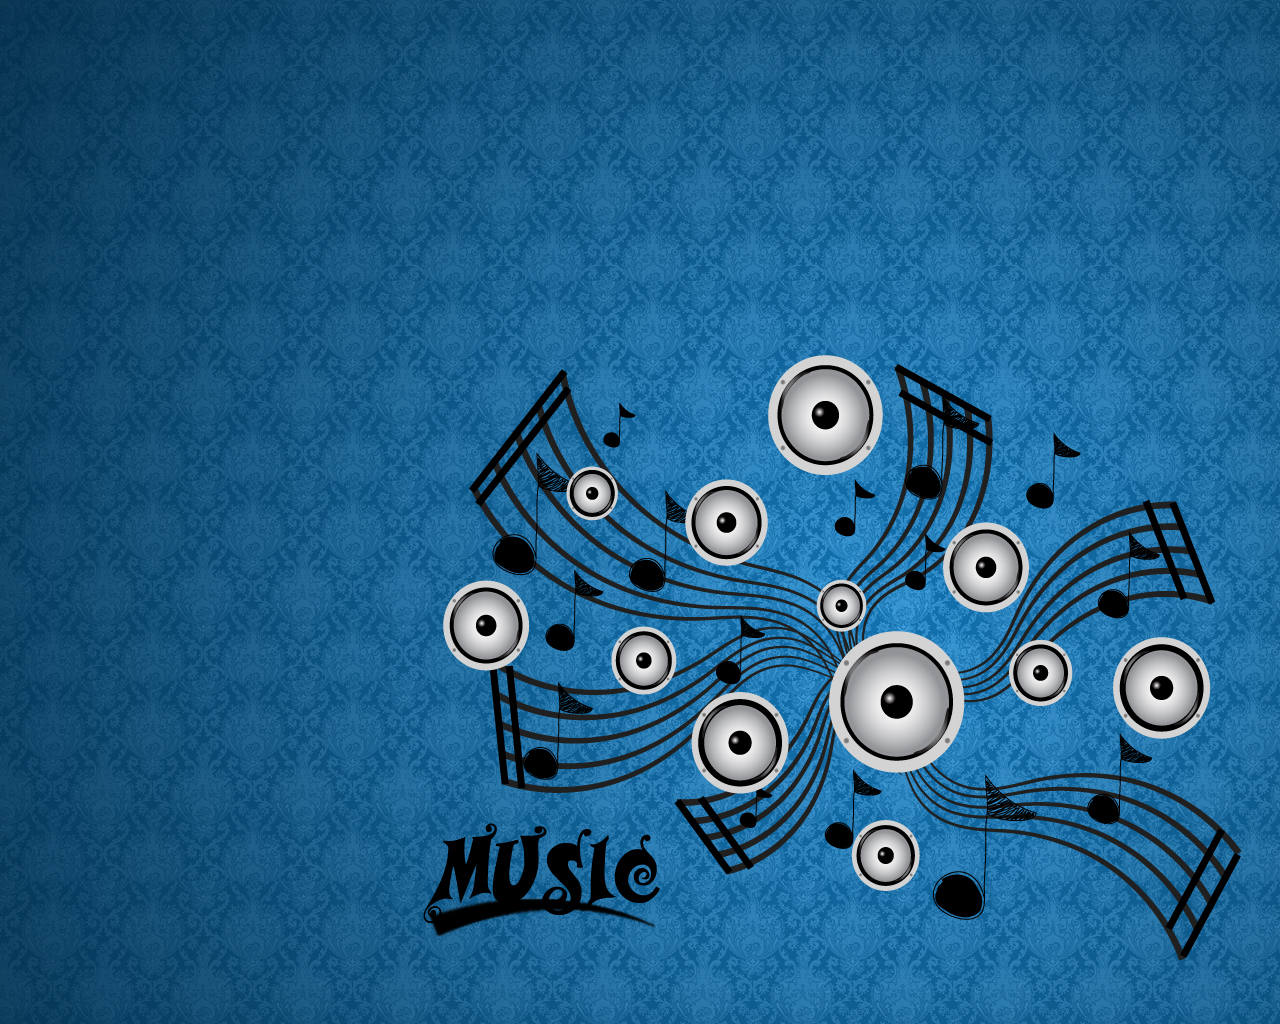 Wallpaper Theme Music Plain With Musical Notes